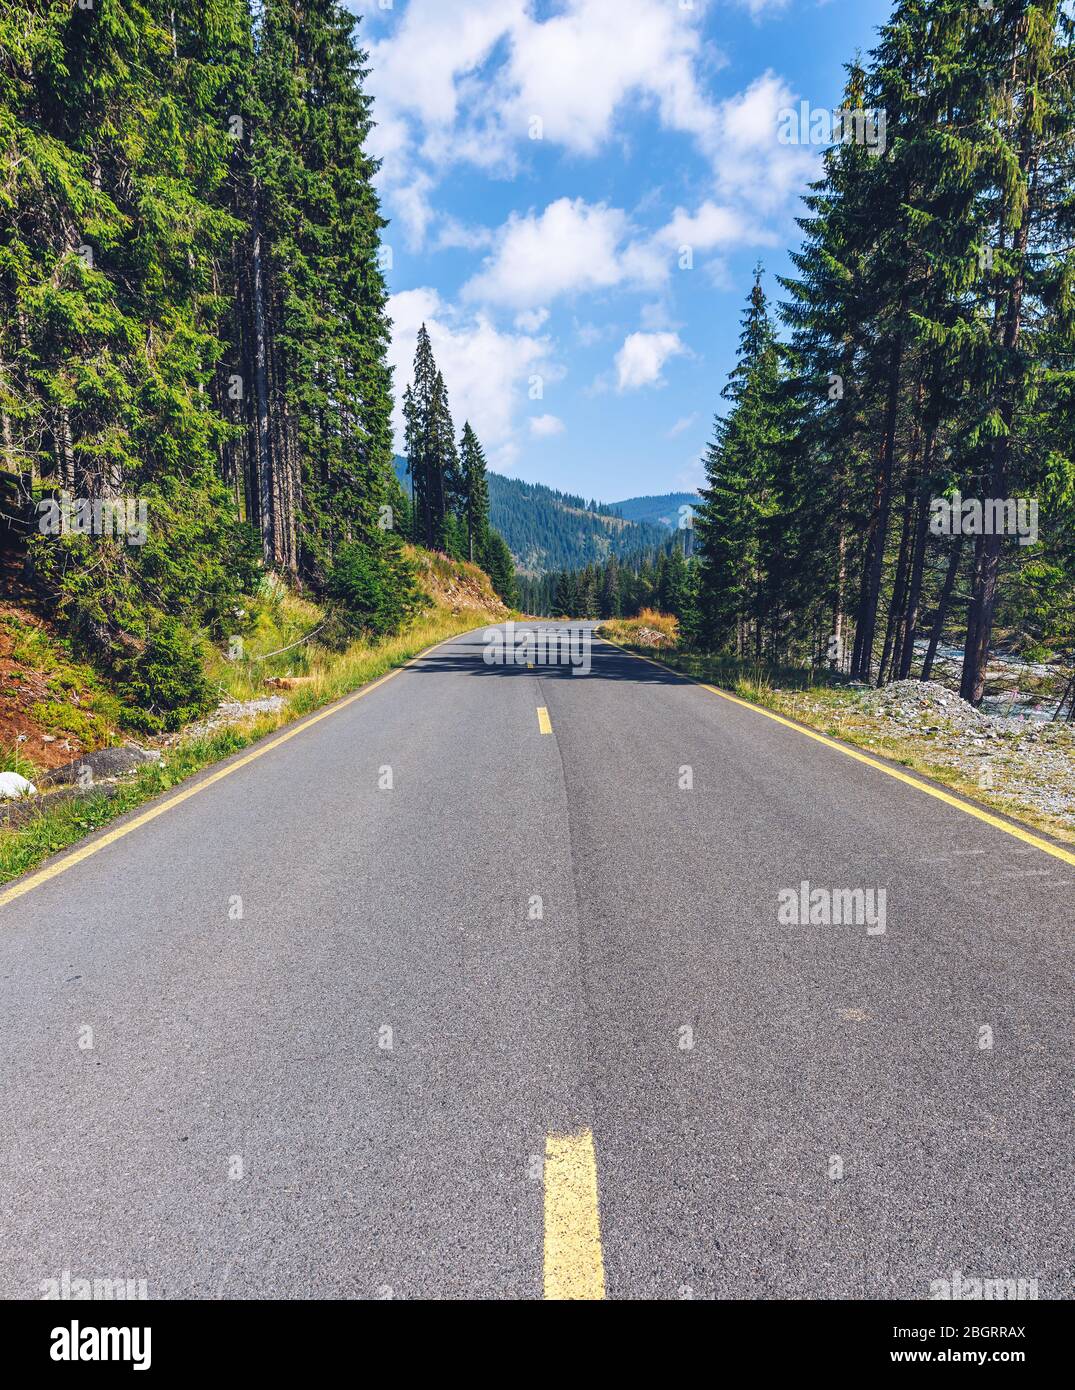 Mountain road. Landscape with rocks, sunny sky with clouds and beautiful asphalt road in the evening in summer. Vintage toning. Travel background. Hig Stock Photo